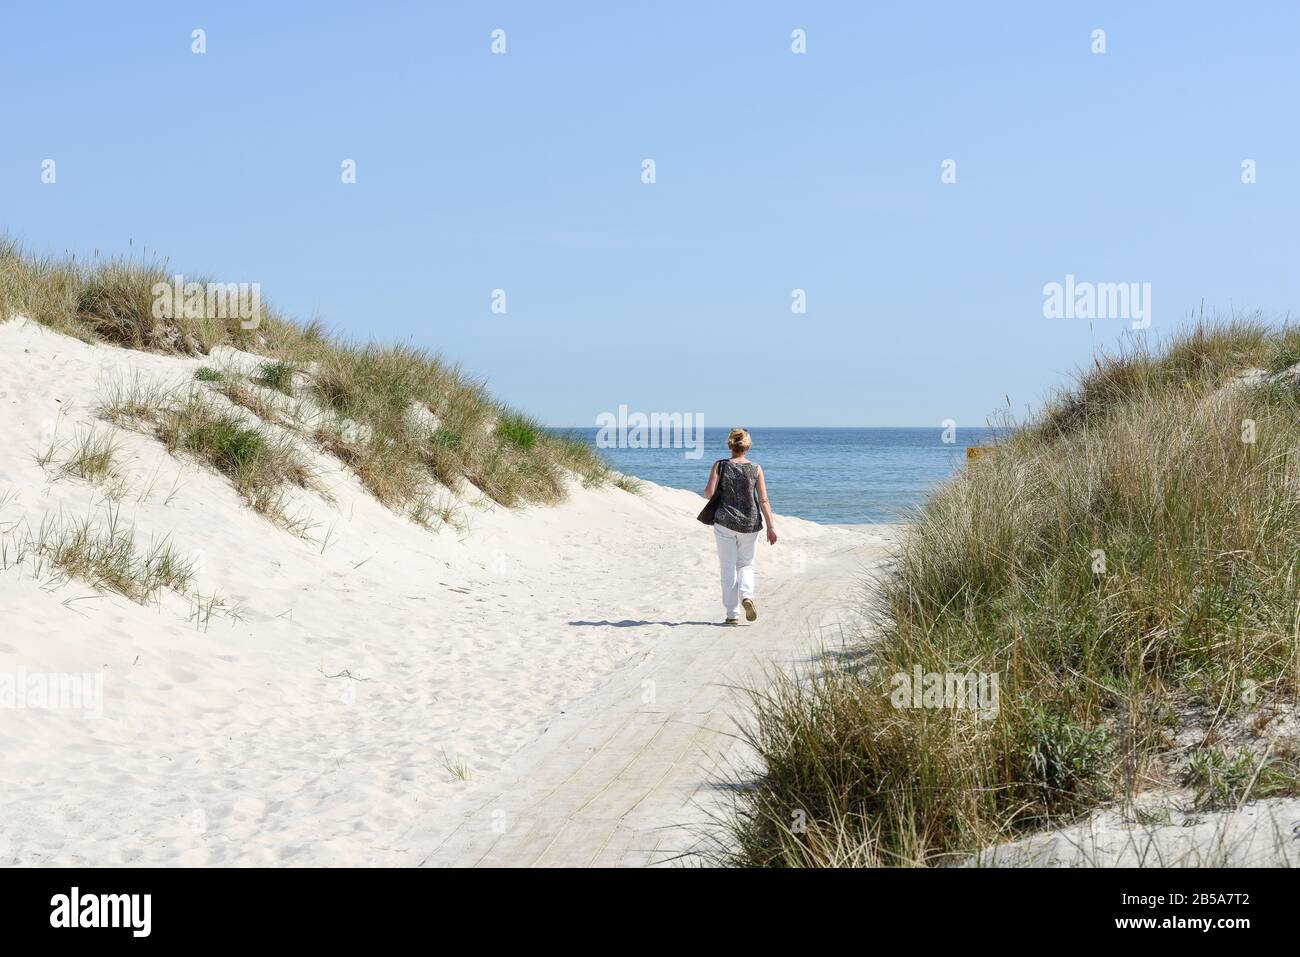 A woman walking to a beach with the sea in the background, Sandhammaren, Ystad, Skane, Sweden Stock Photo